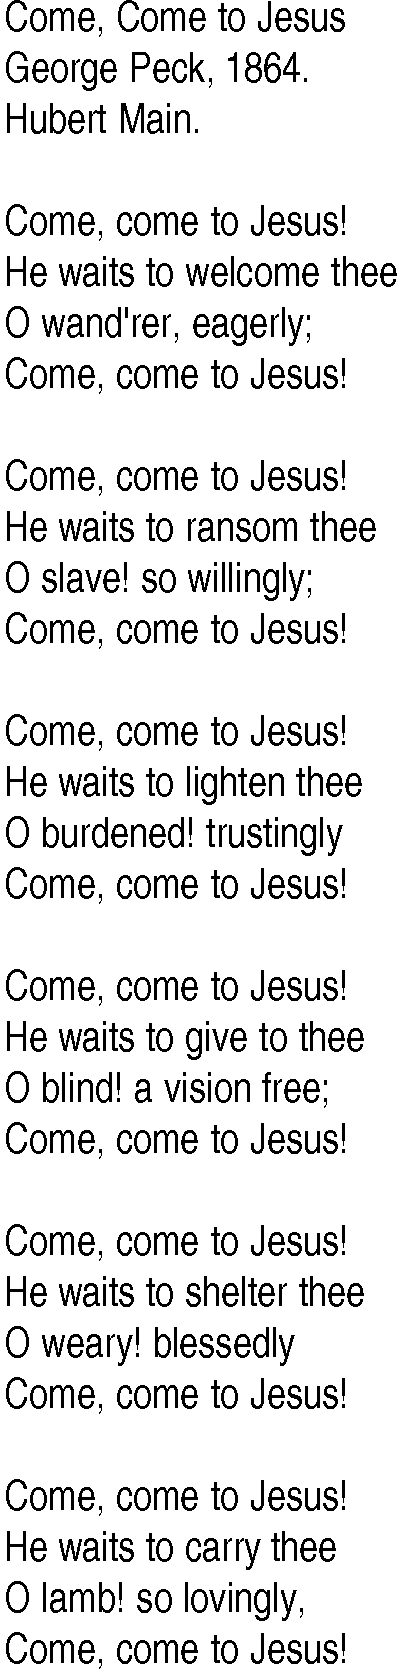 Hymn and Gospel Song: Come, Come to Jesus by George Peck lyrics